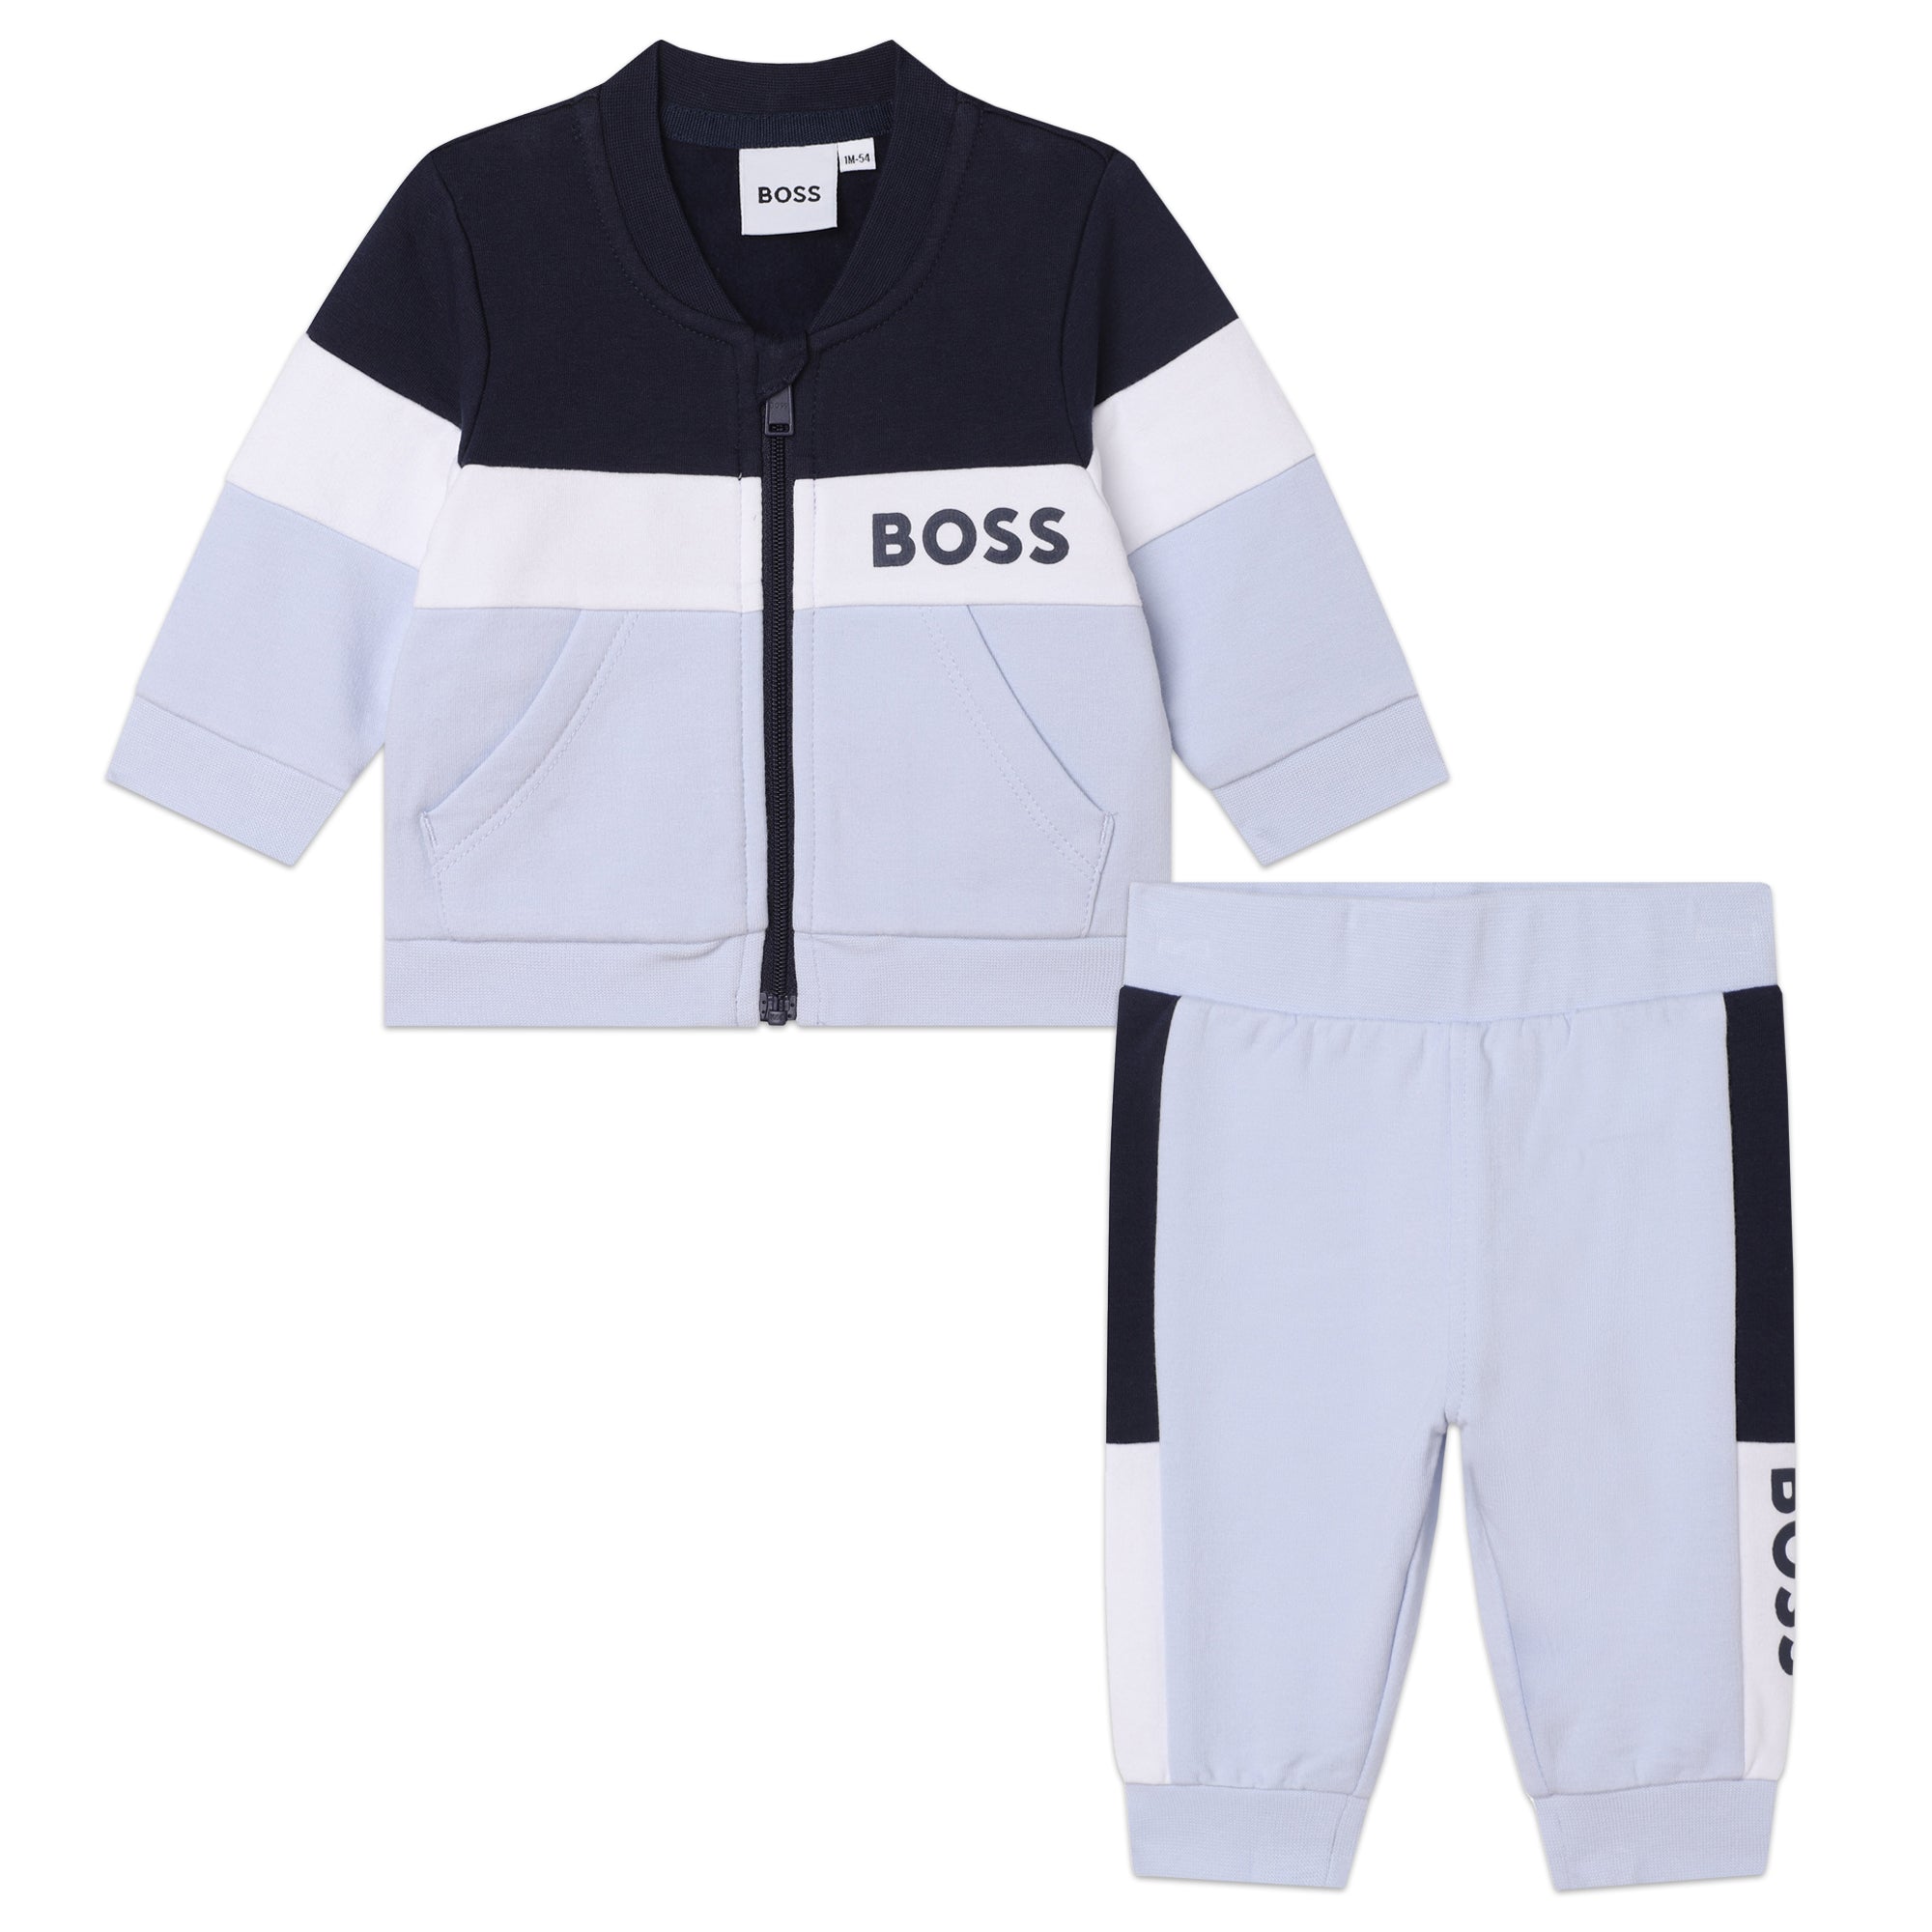 boss baby boys tracksuit zip top and pants set in pale blue 18m 95% cotton, 5% elastane - lining: 96% 4%